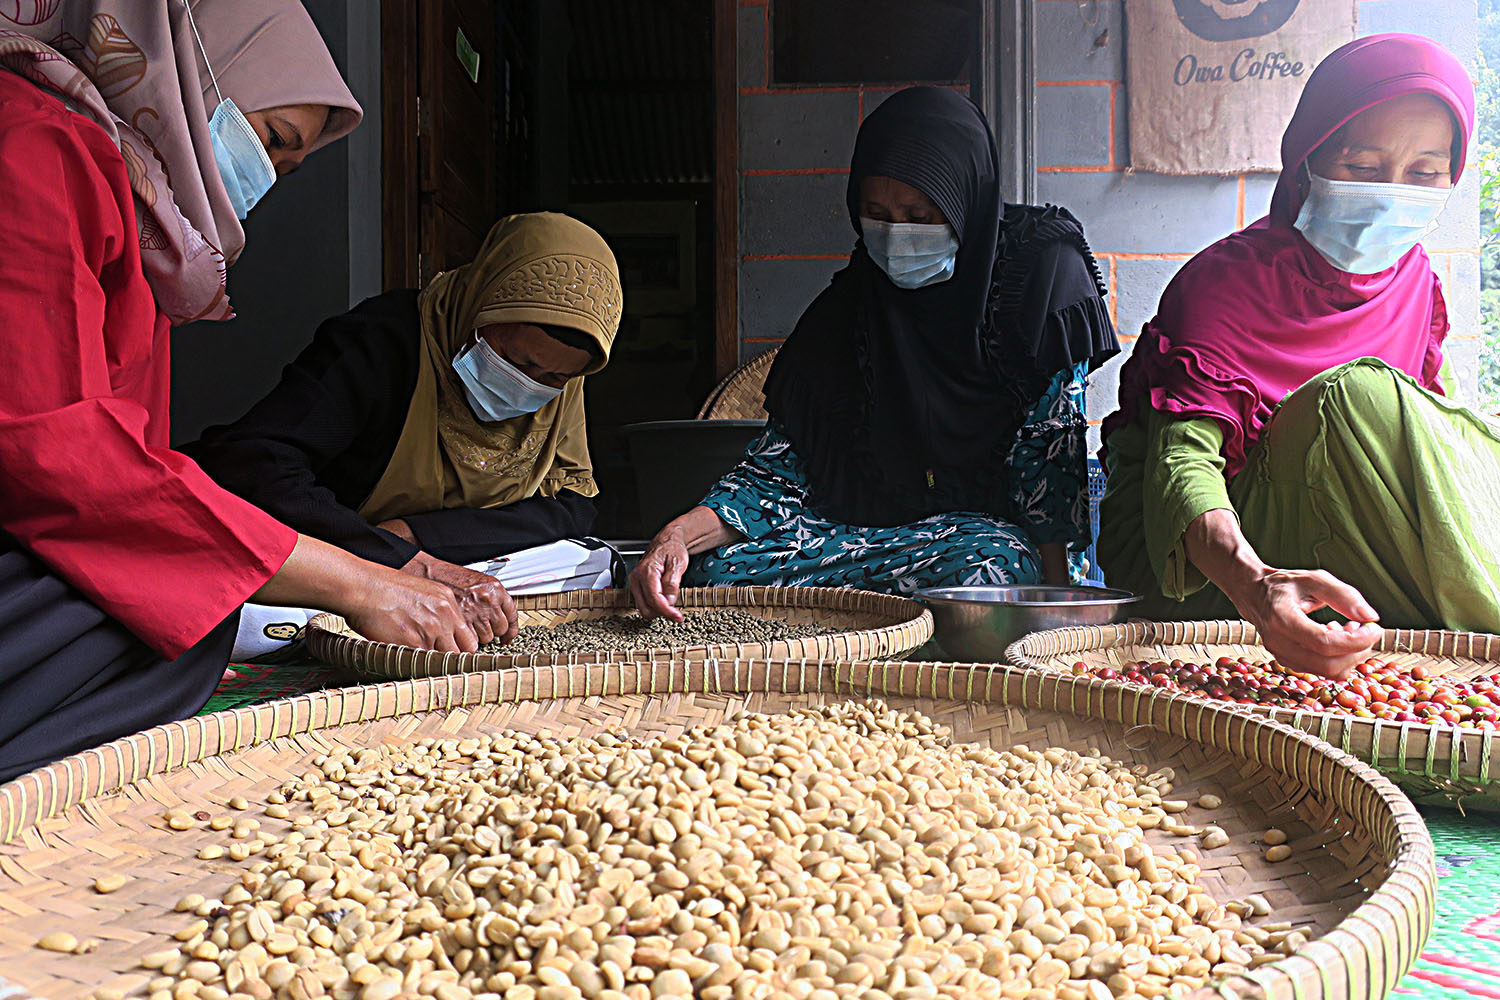 Four masked women sort coffee beans by hand.